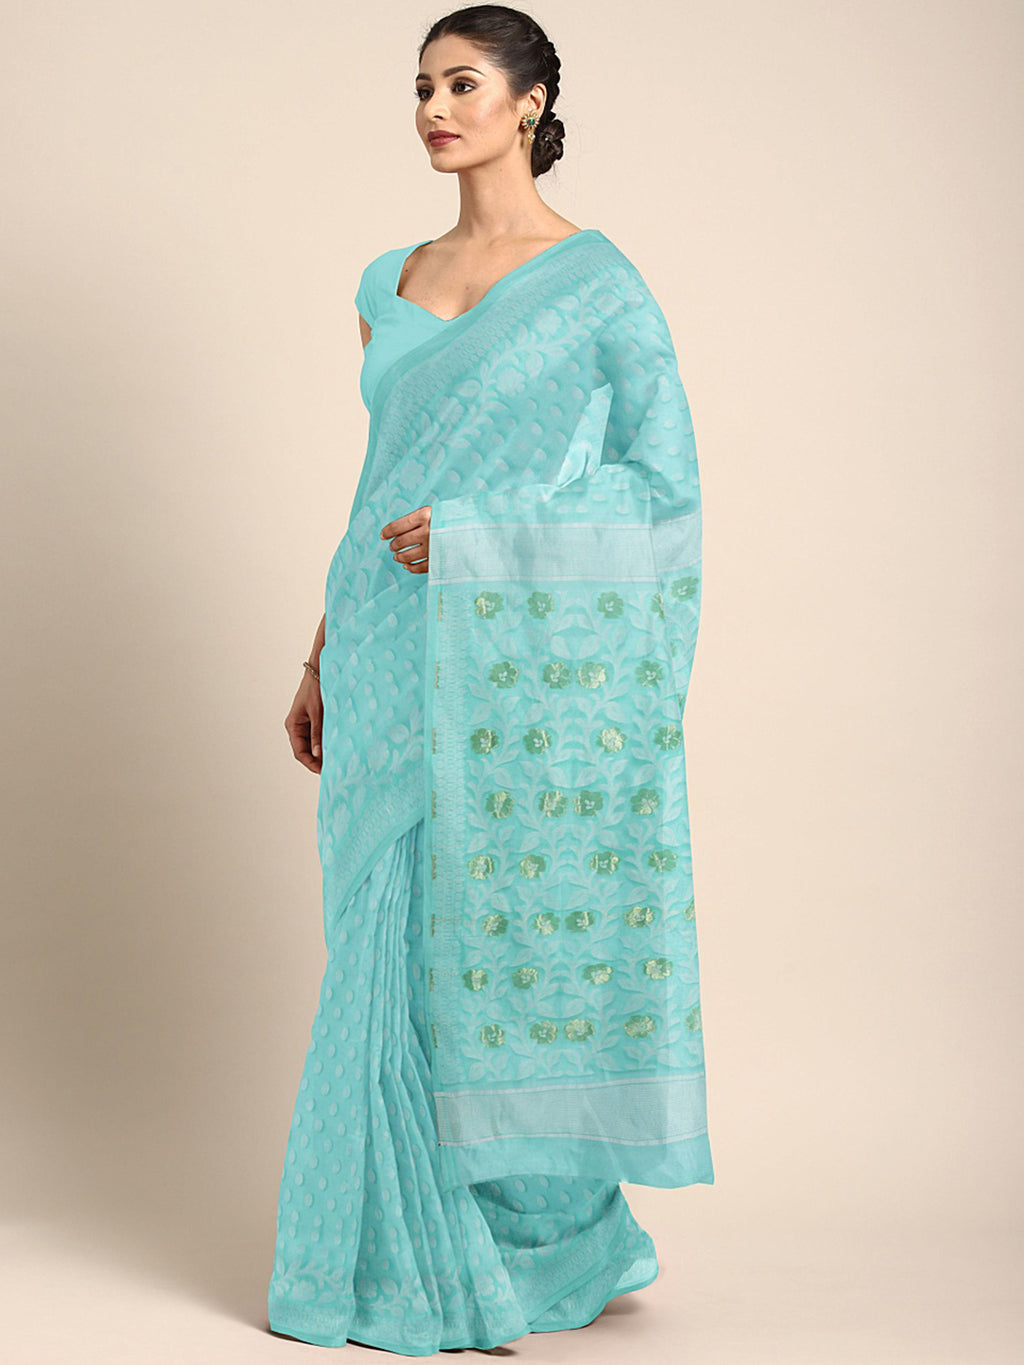 Sea Green Jamdani Woven Design Saree Without Blouse Piece CHBHSA0059 CHBHSA0059-Saree-Kalakari India-CHBHSA0059-Geographical Indication, Hand Crafted, Heritage Prints, Jamdani, Natural Dyes, Nayantara, Sarees, Silk Cotton, Sustainable Fabrics, West Bengal, Woven-[Linen,Ethnic,wear,Fashionista,Handloom,Handicraft,Indigo,blockprint,block,print,Cotton,Chanderi,Blue, latest,classy,party,bollywood,trendy,summer,style,traditional,formal,elegant,unique,style,hand,block,print, dabu,booti,gift,present,gl